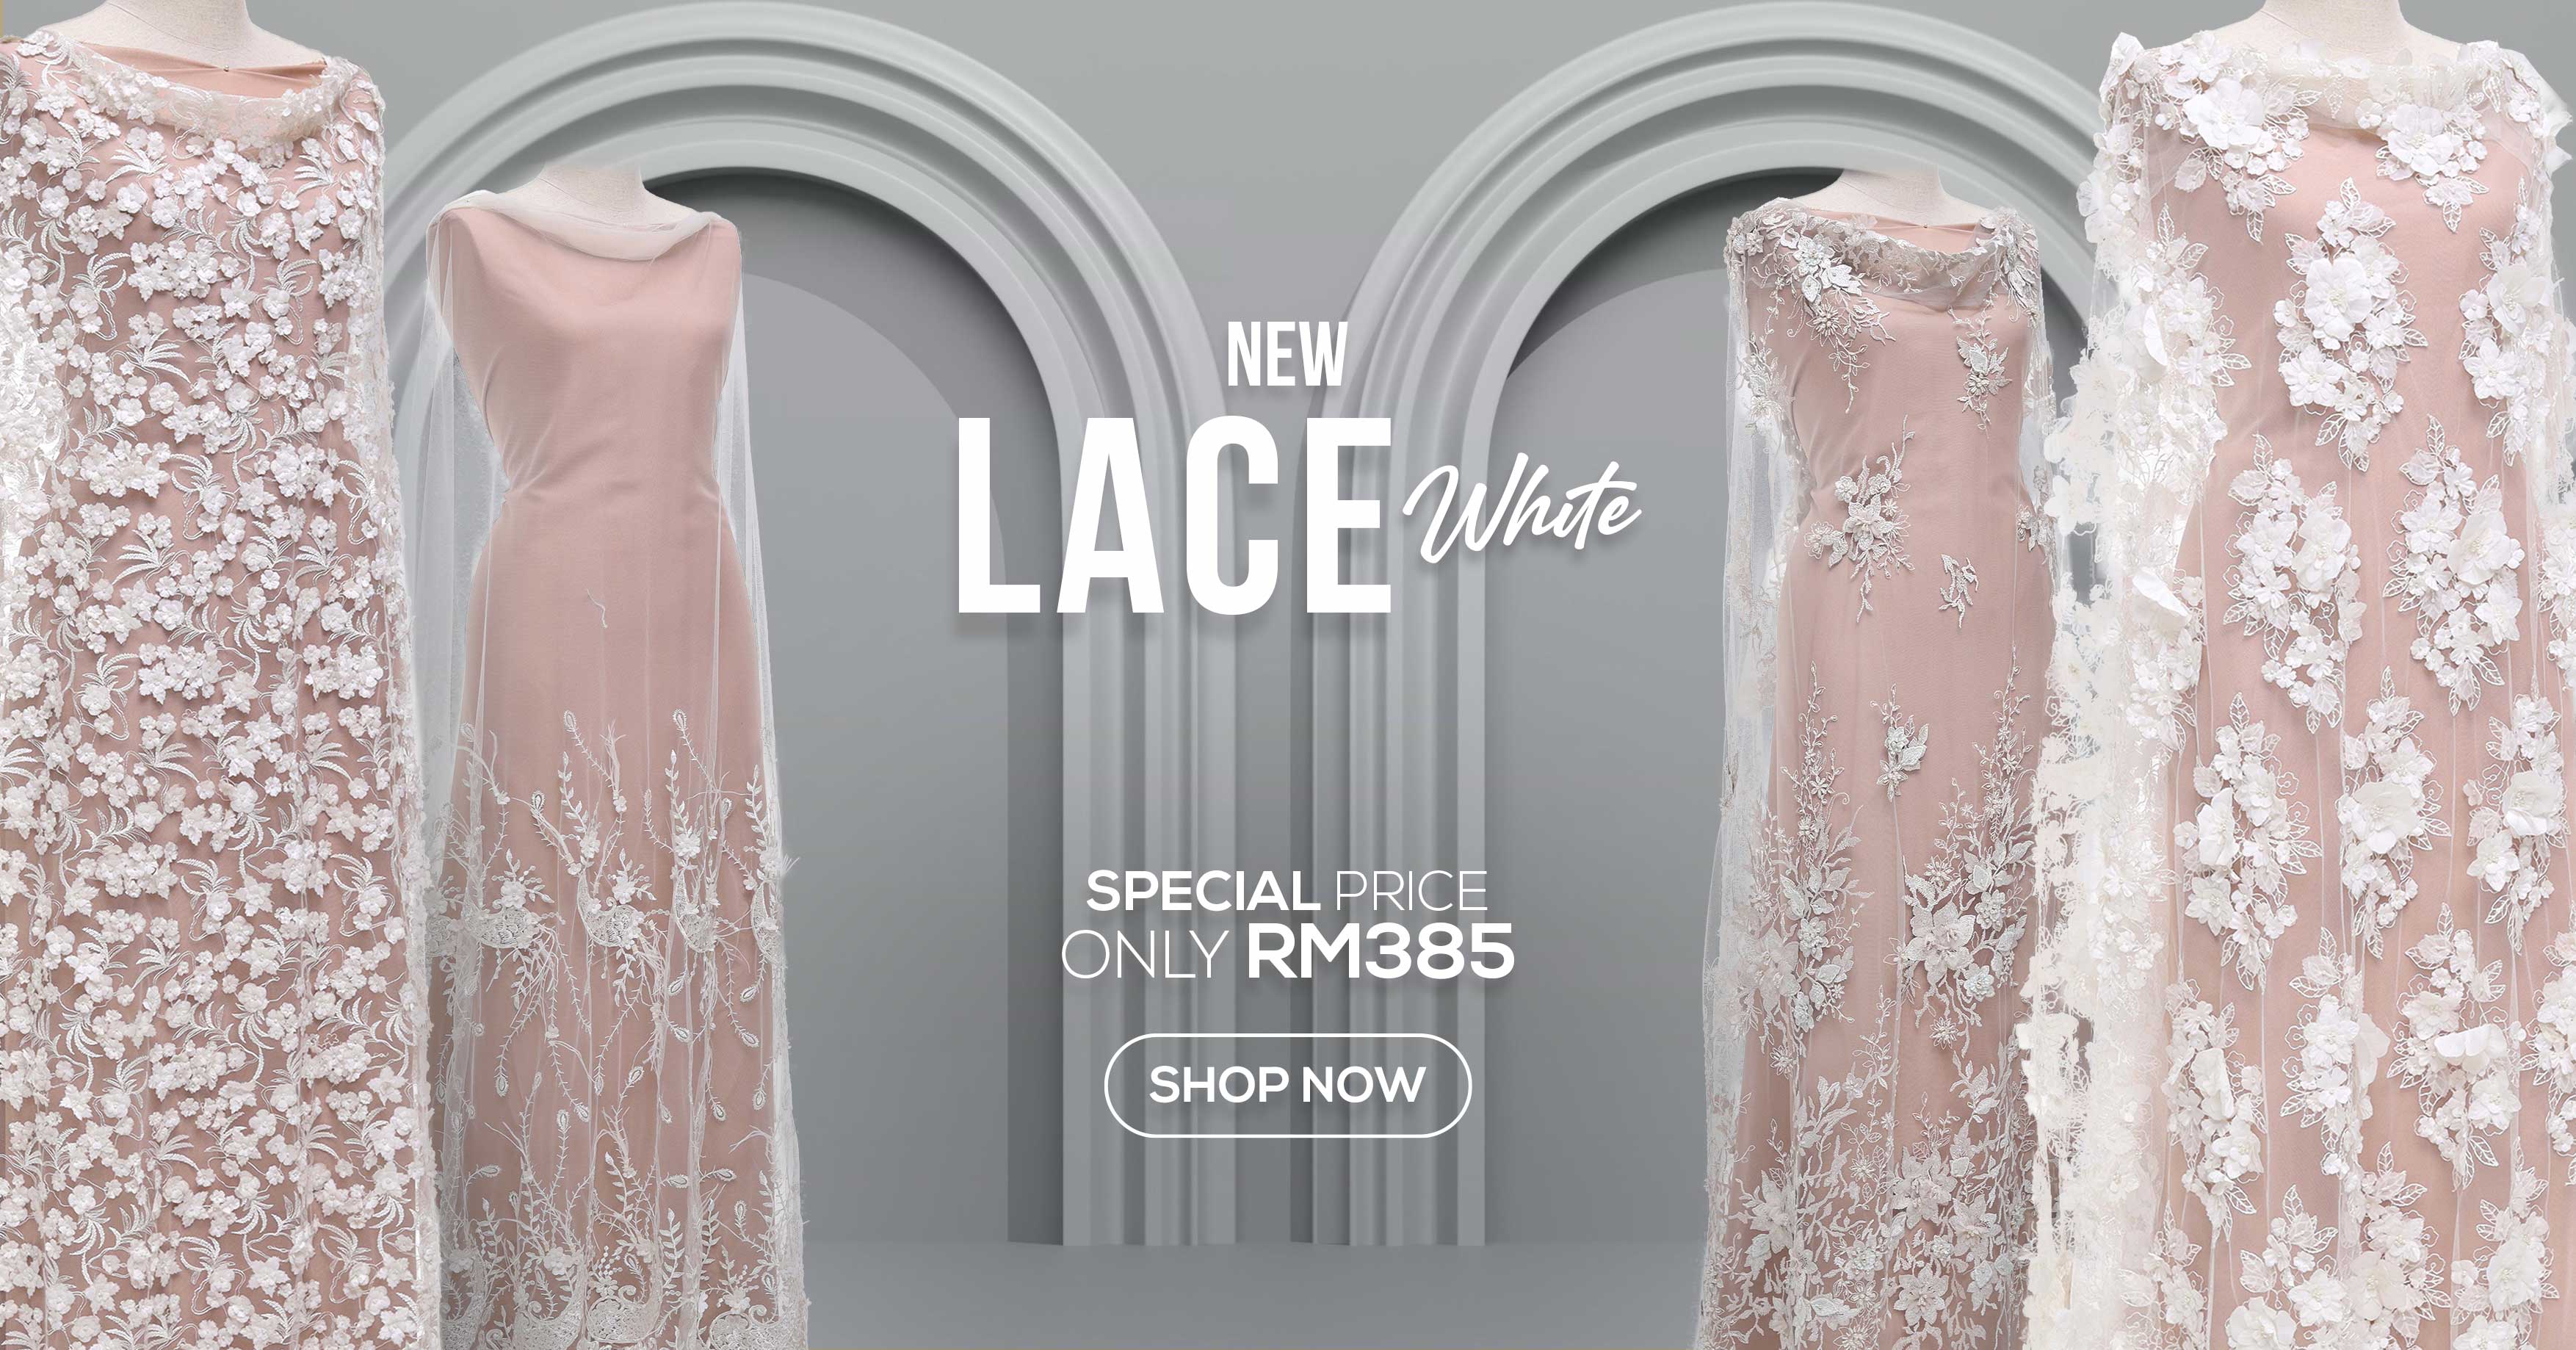 New Lace White - RM385